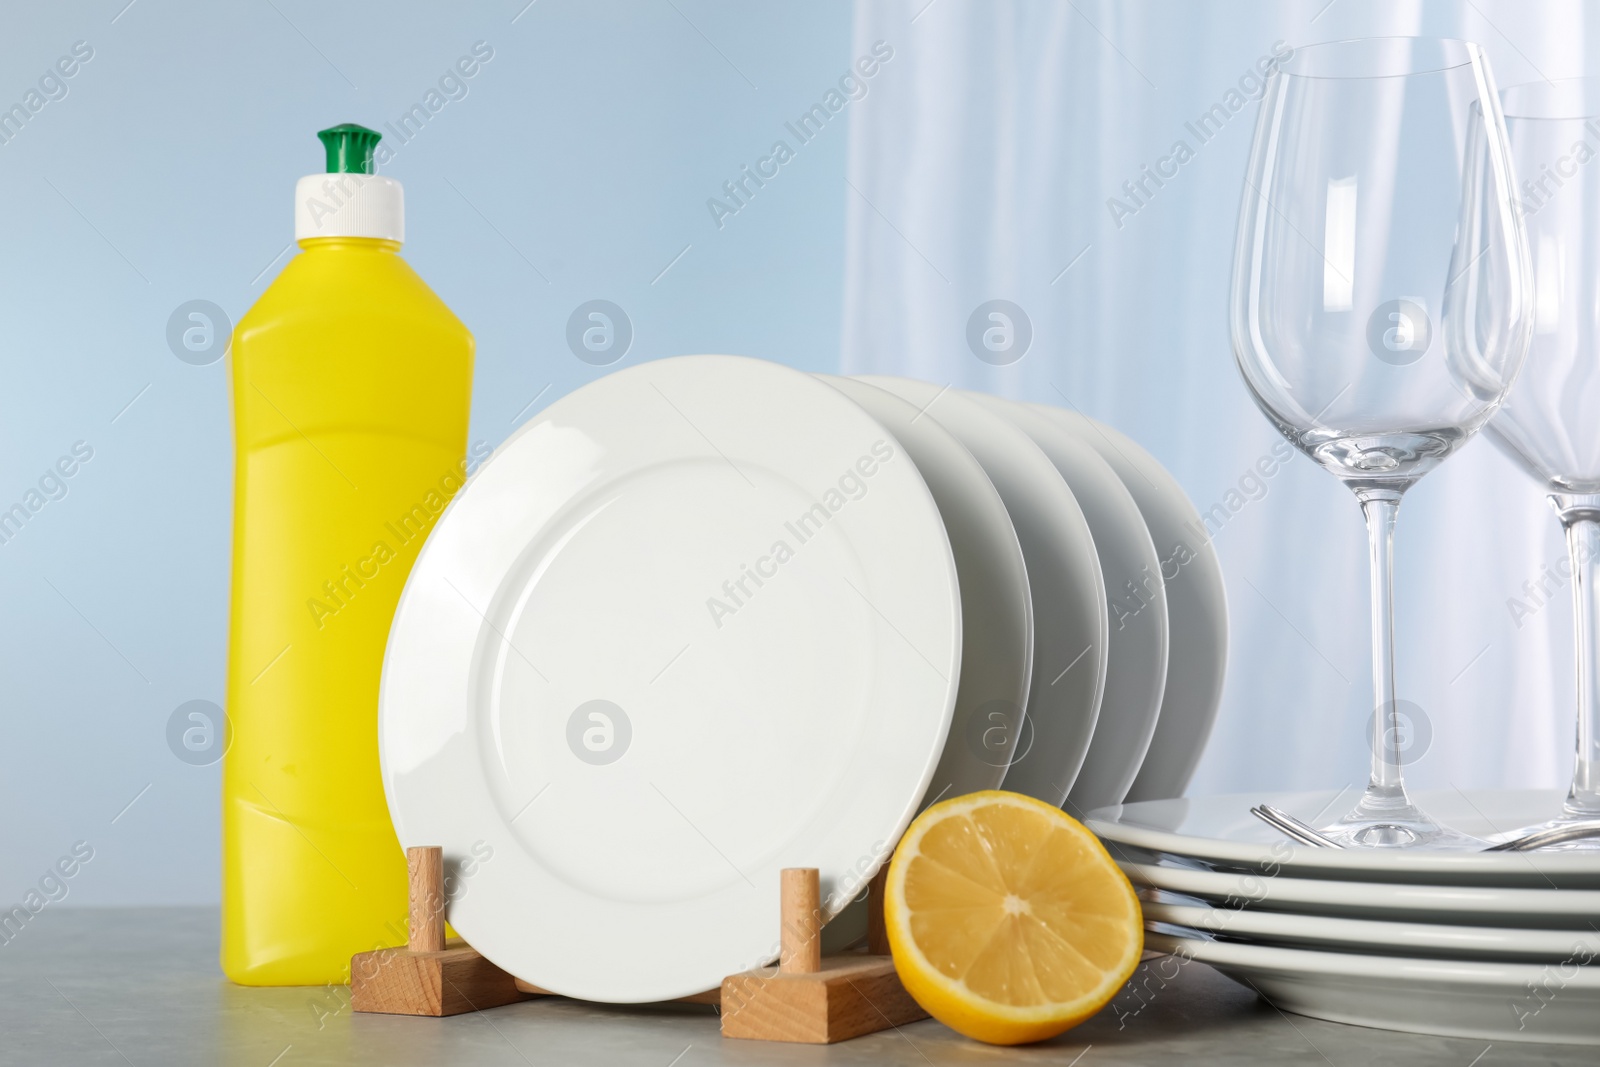 Photo of Glasses, clean dishware and bottle of detergent on grey marble table